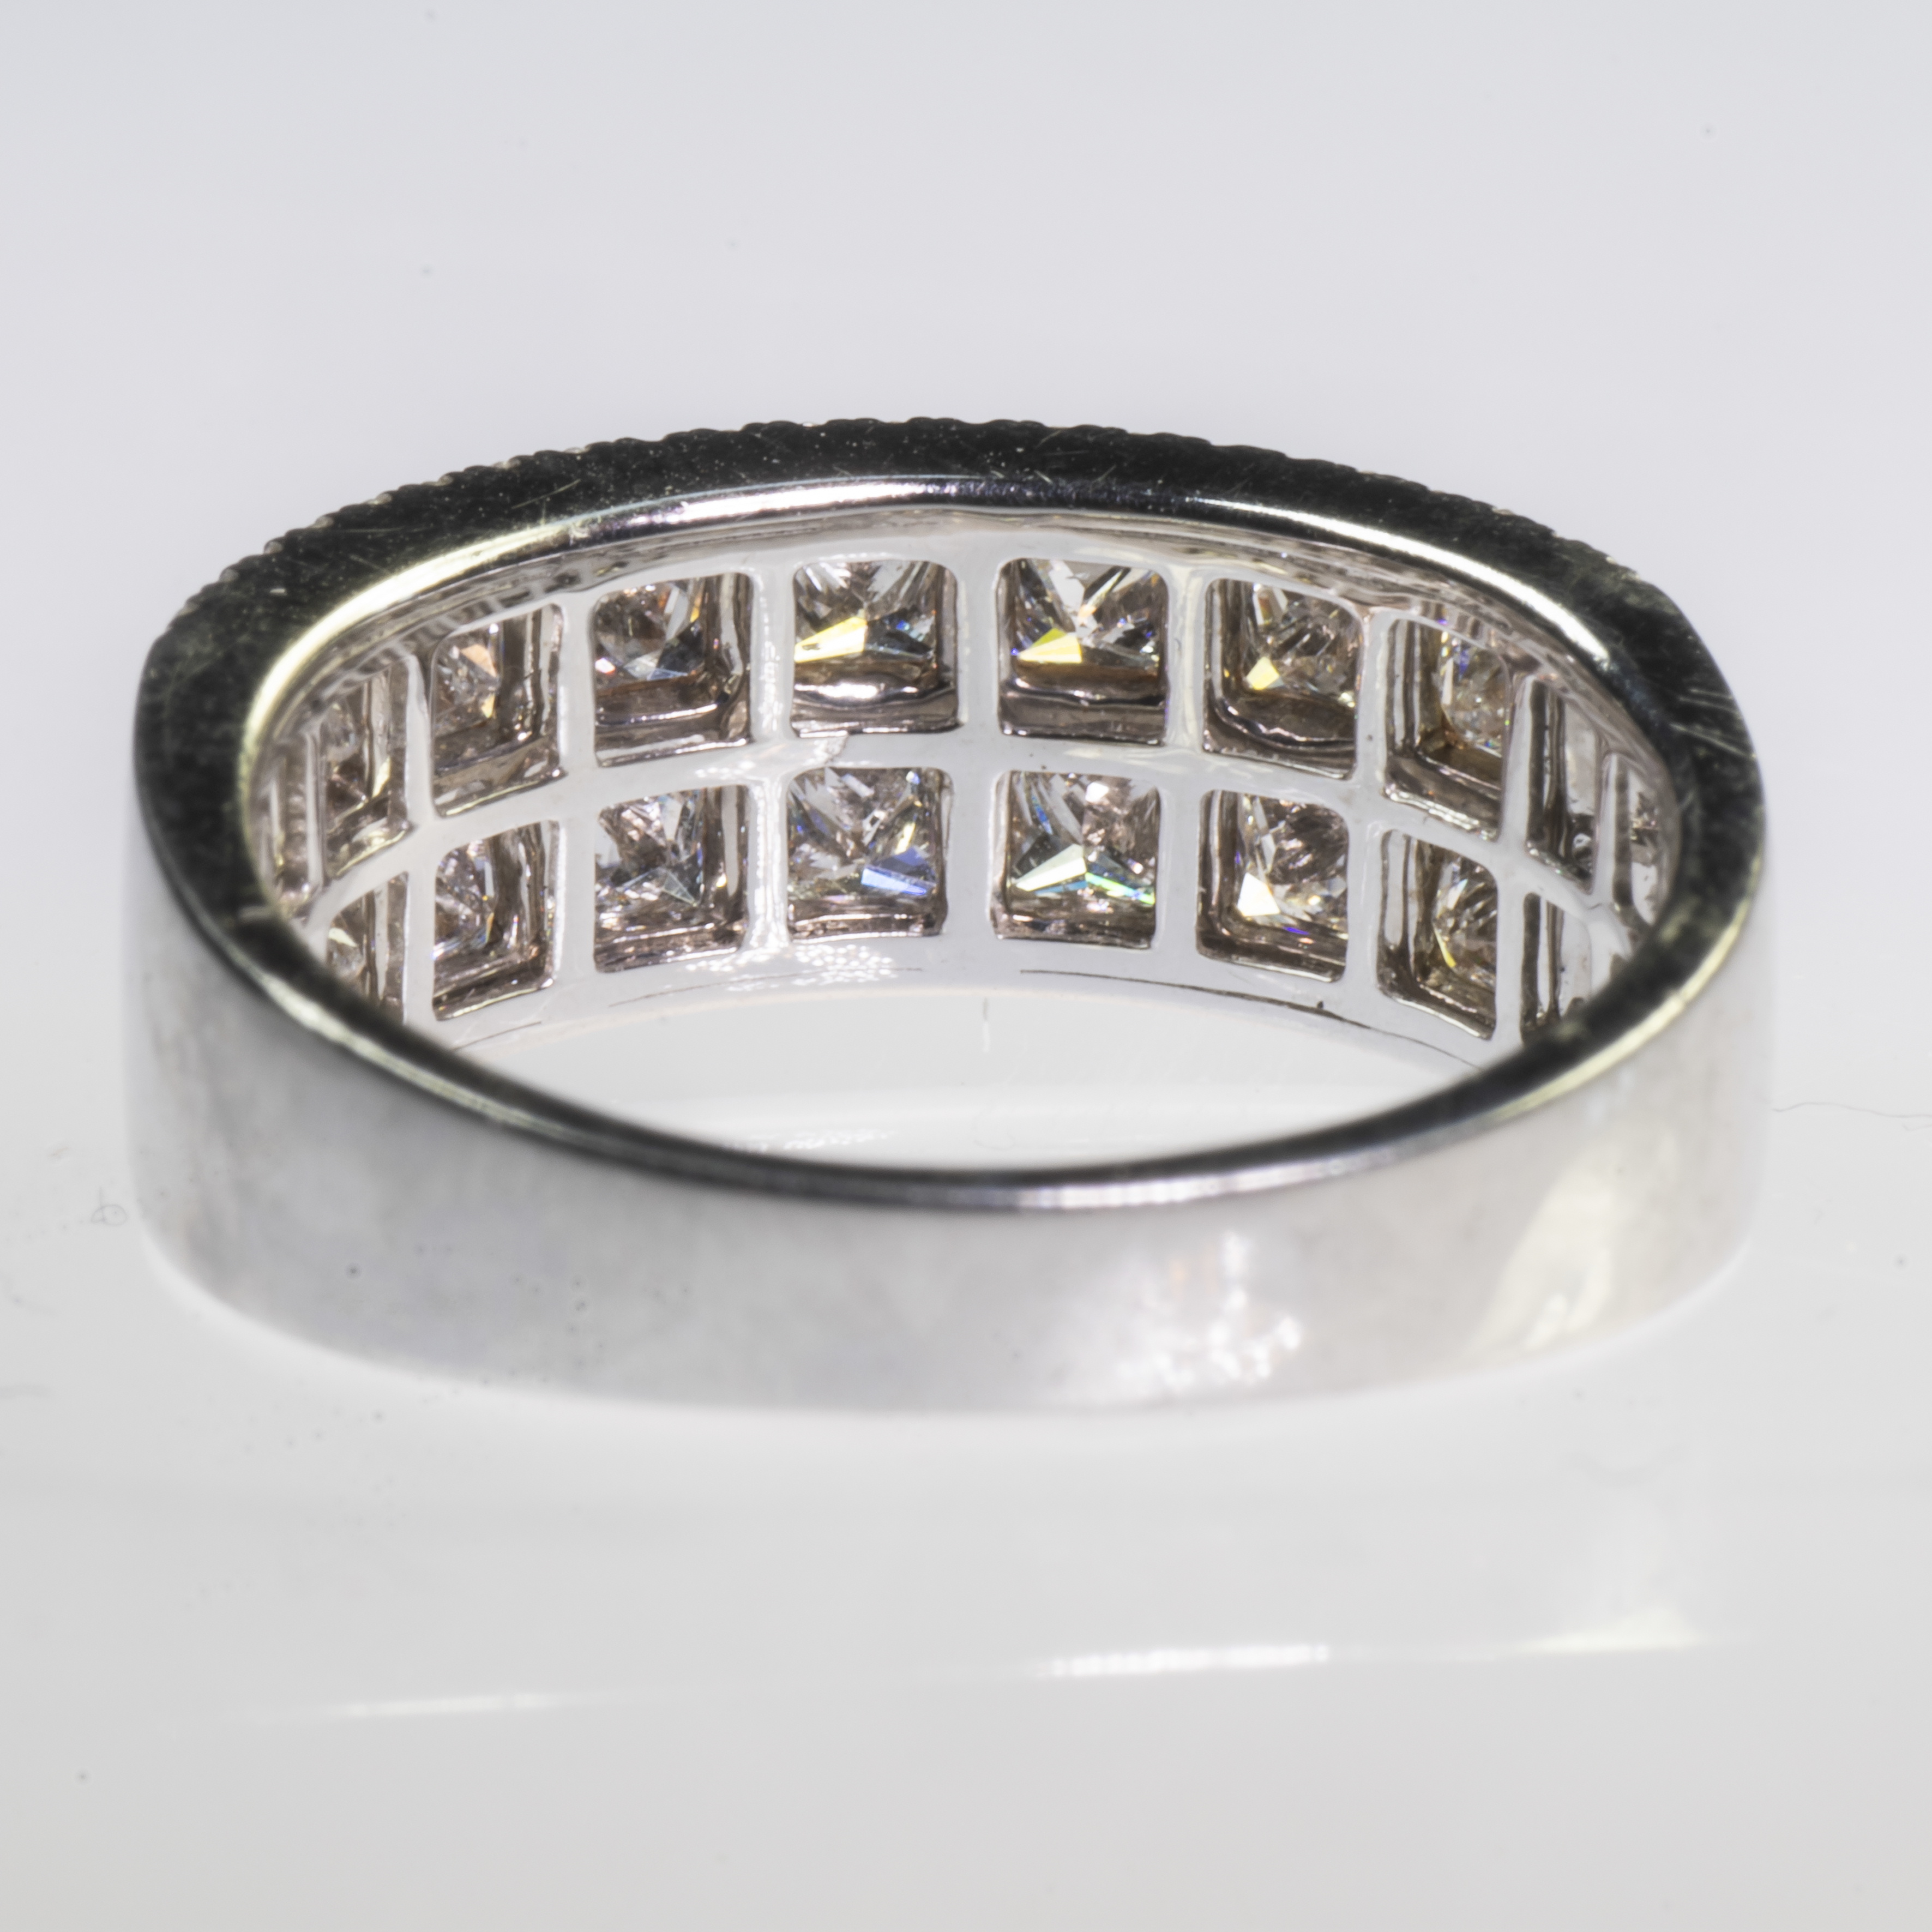 AN 18CT WHITE GOLD AND PRINCESS CUT DIAMOND PAVE SET RING - Image 3 of 3